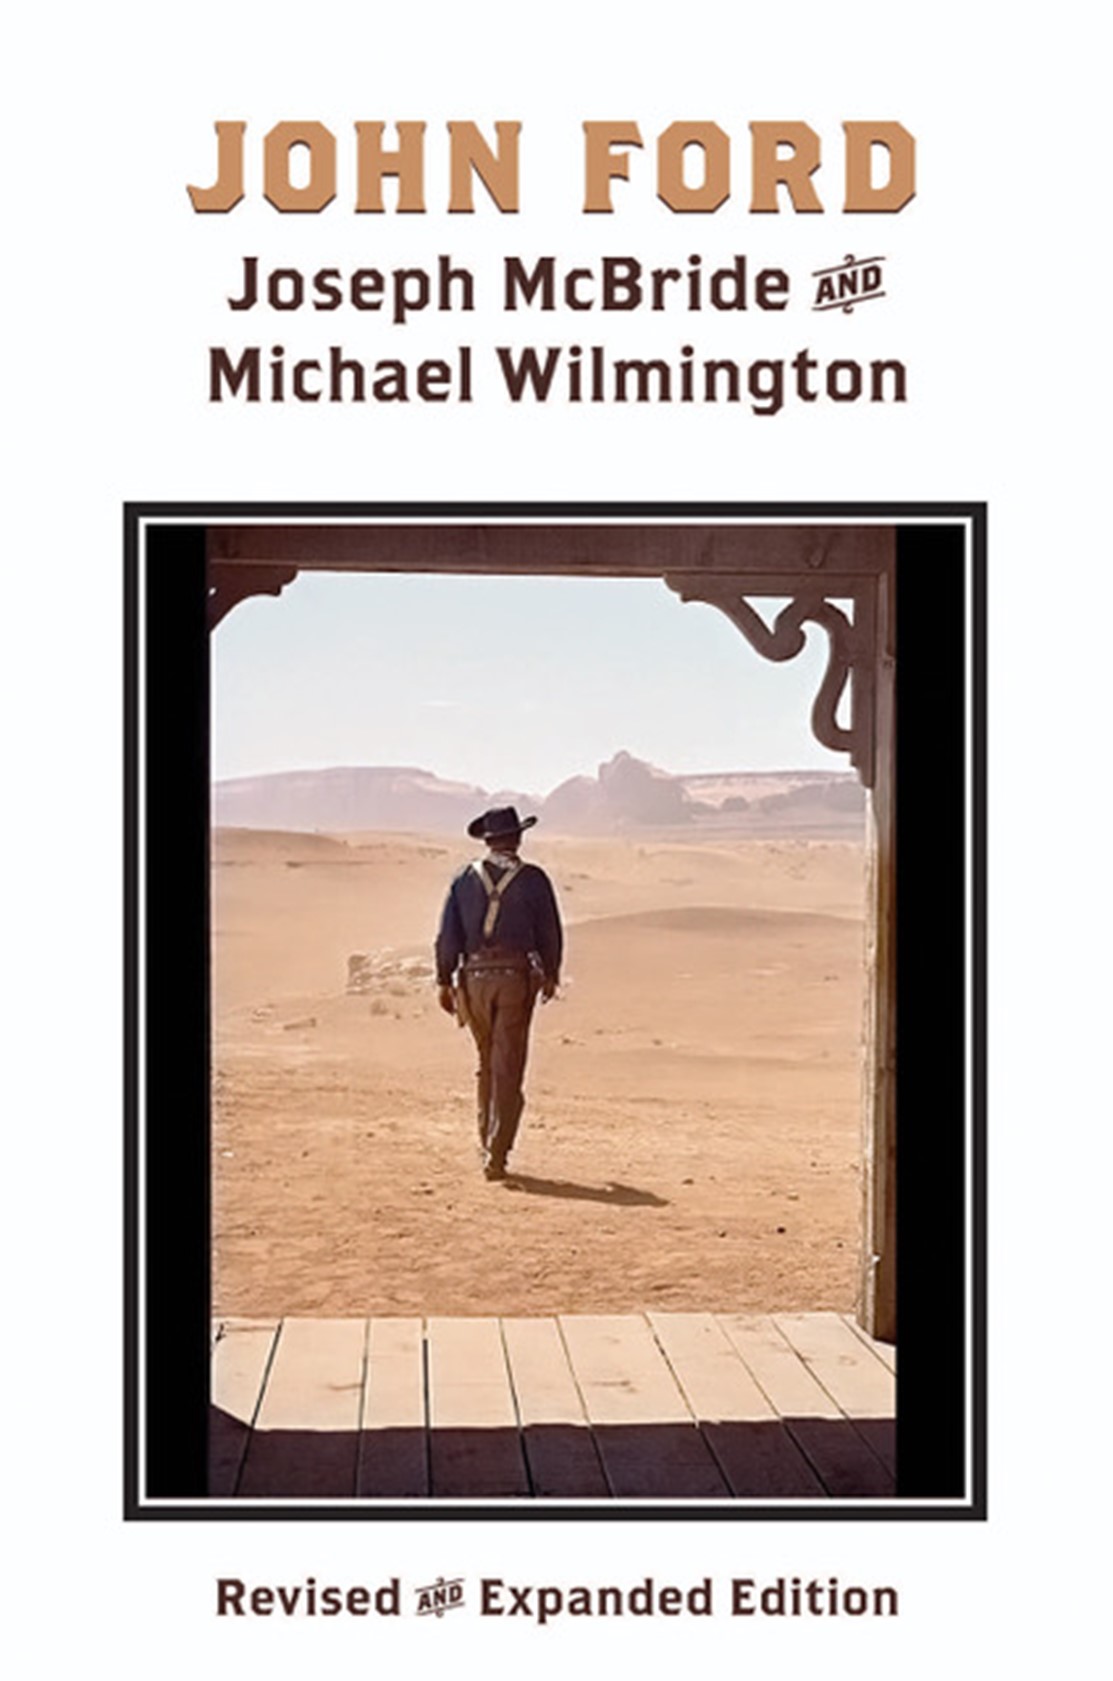 A cowboy walking out of a parlor into the desert